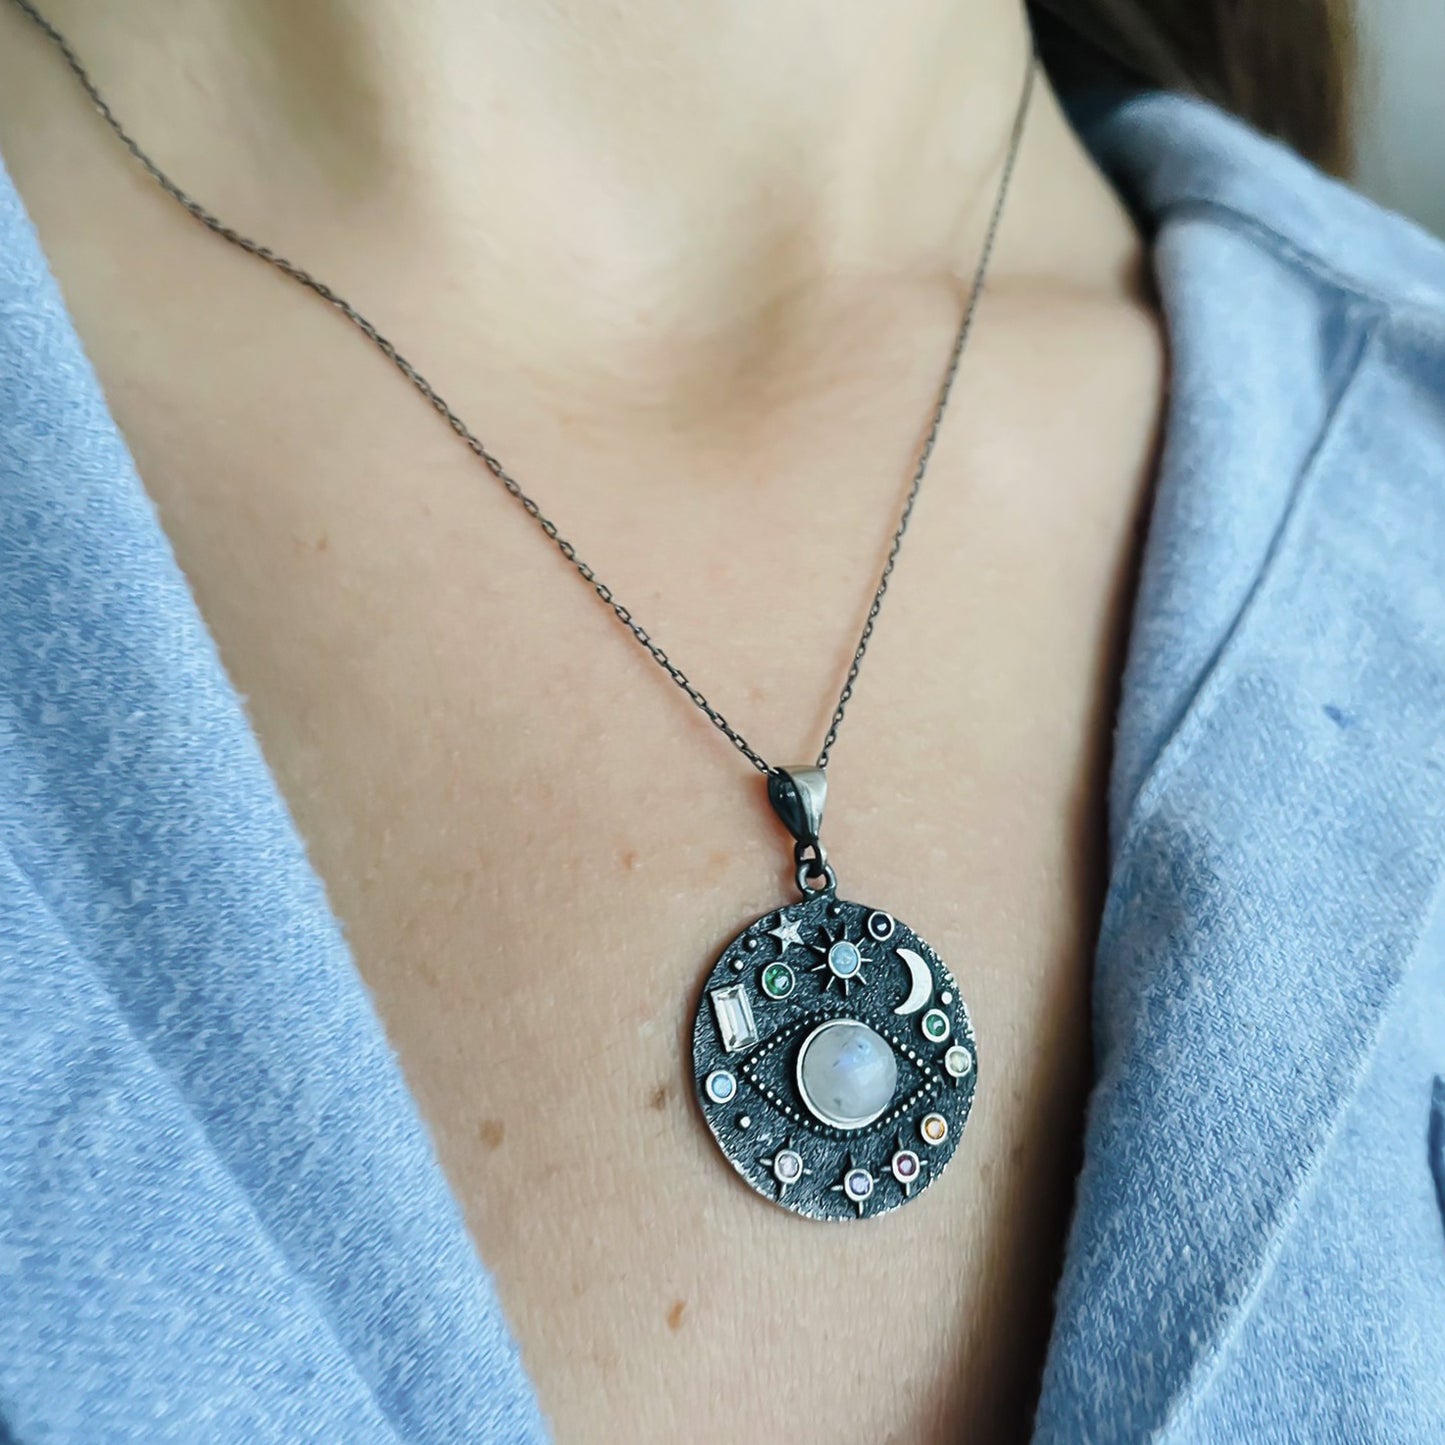 Eye Locket - with star necklace pendant